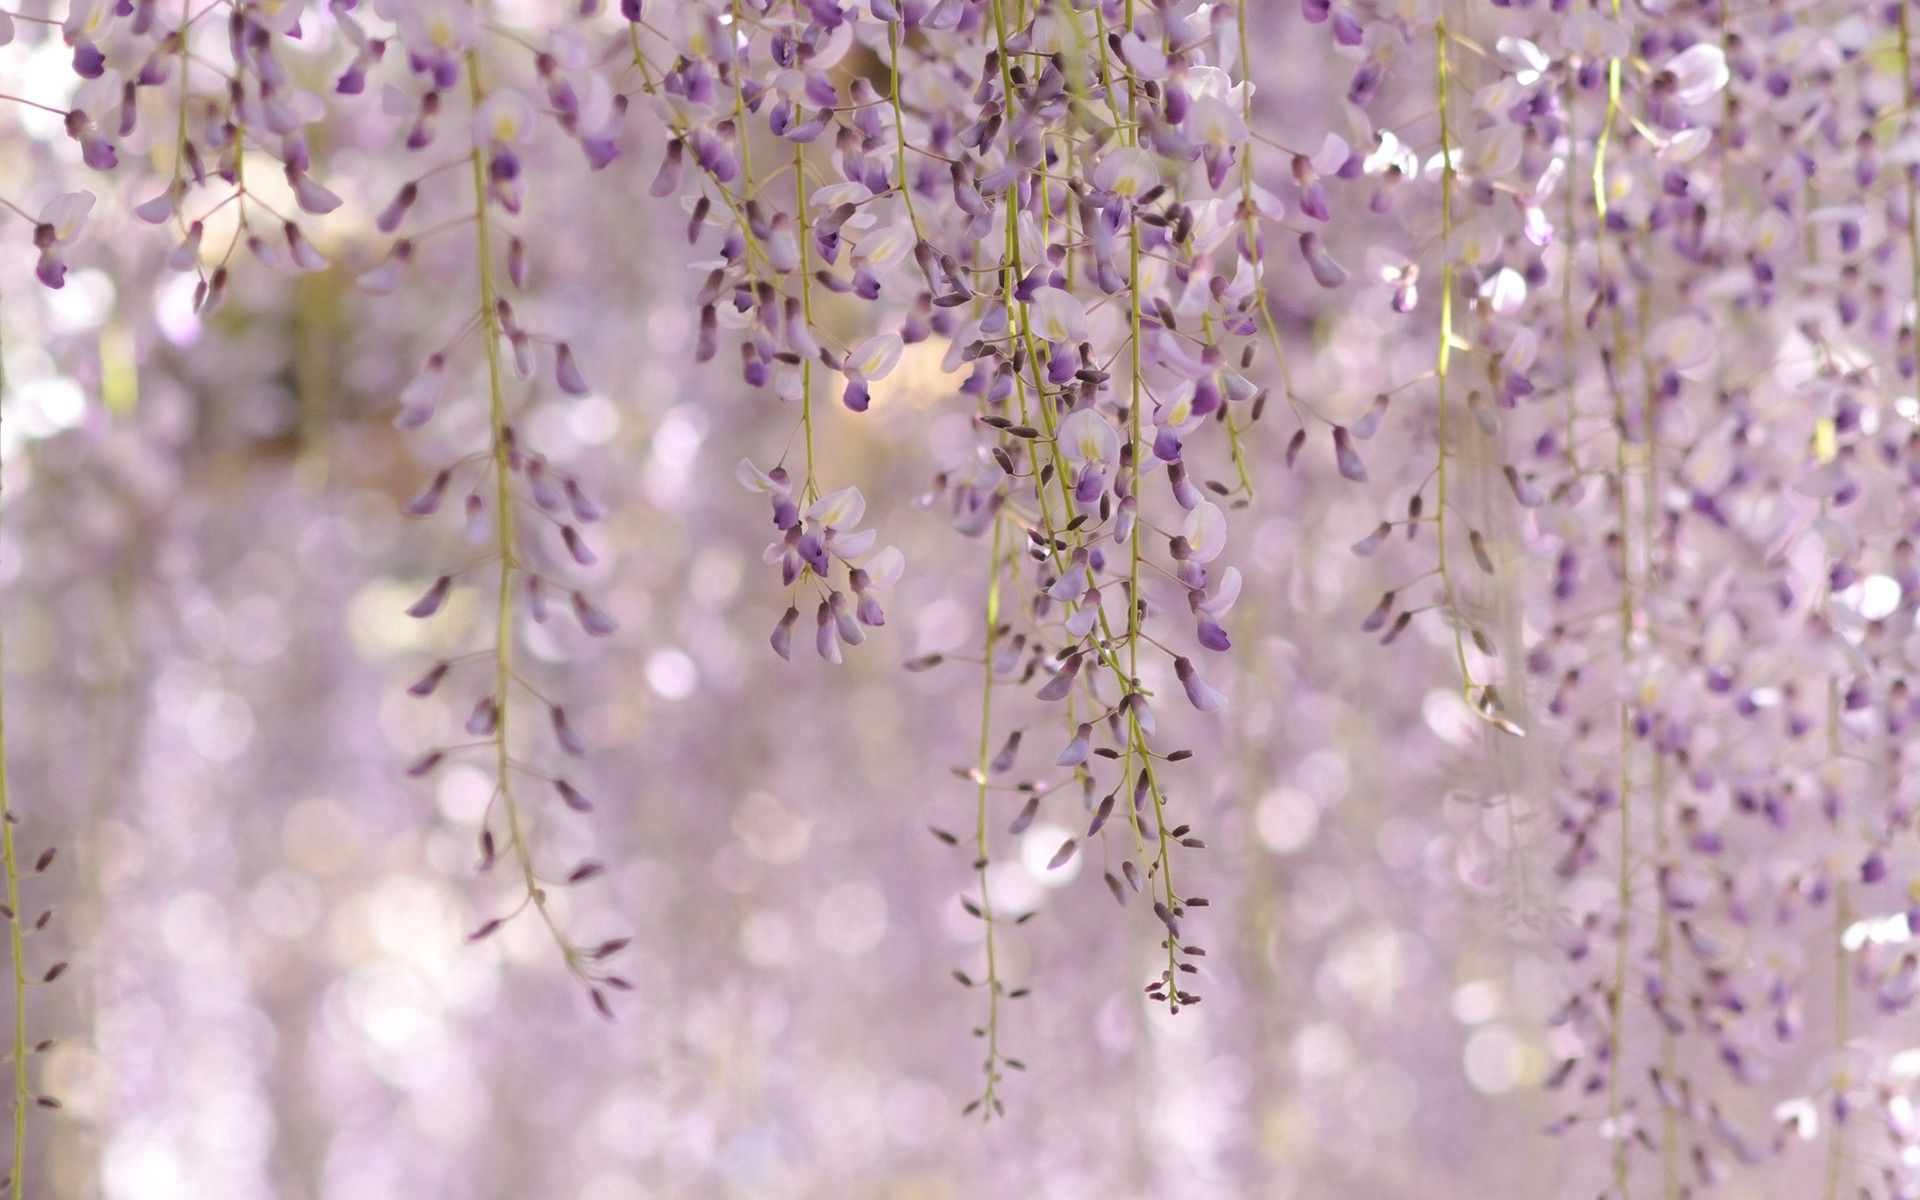 Lilac Widescreen image